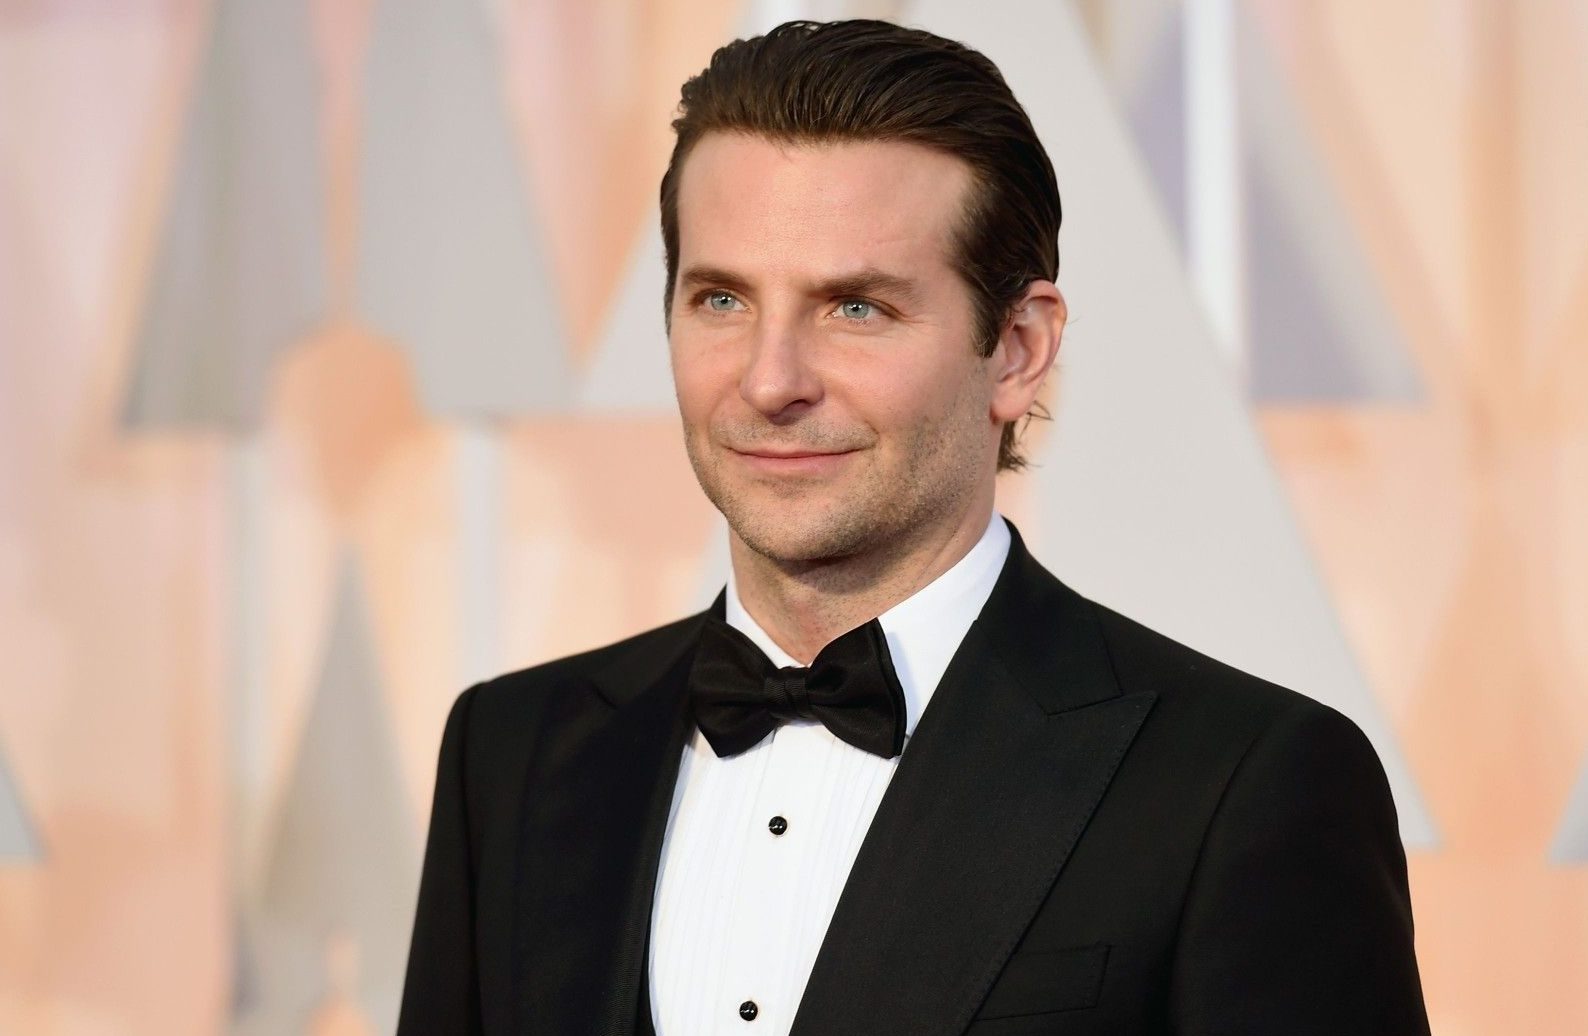 When Will You Meet Your Soulmate? ❤️ Rate a Bunch of Male Celebrities to Find Out Bradley Cooper